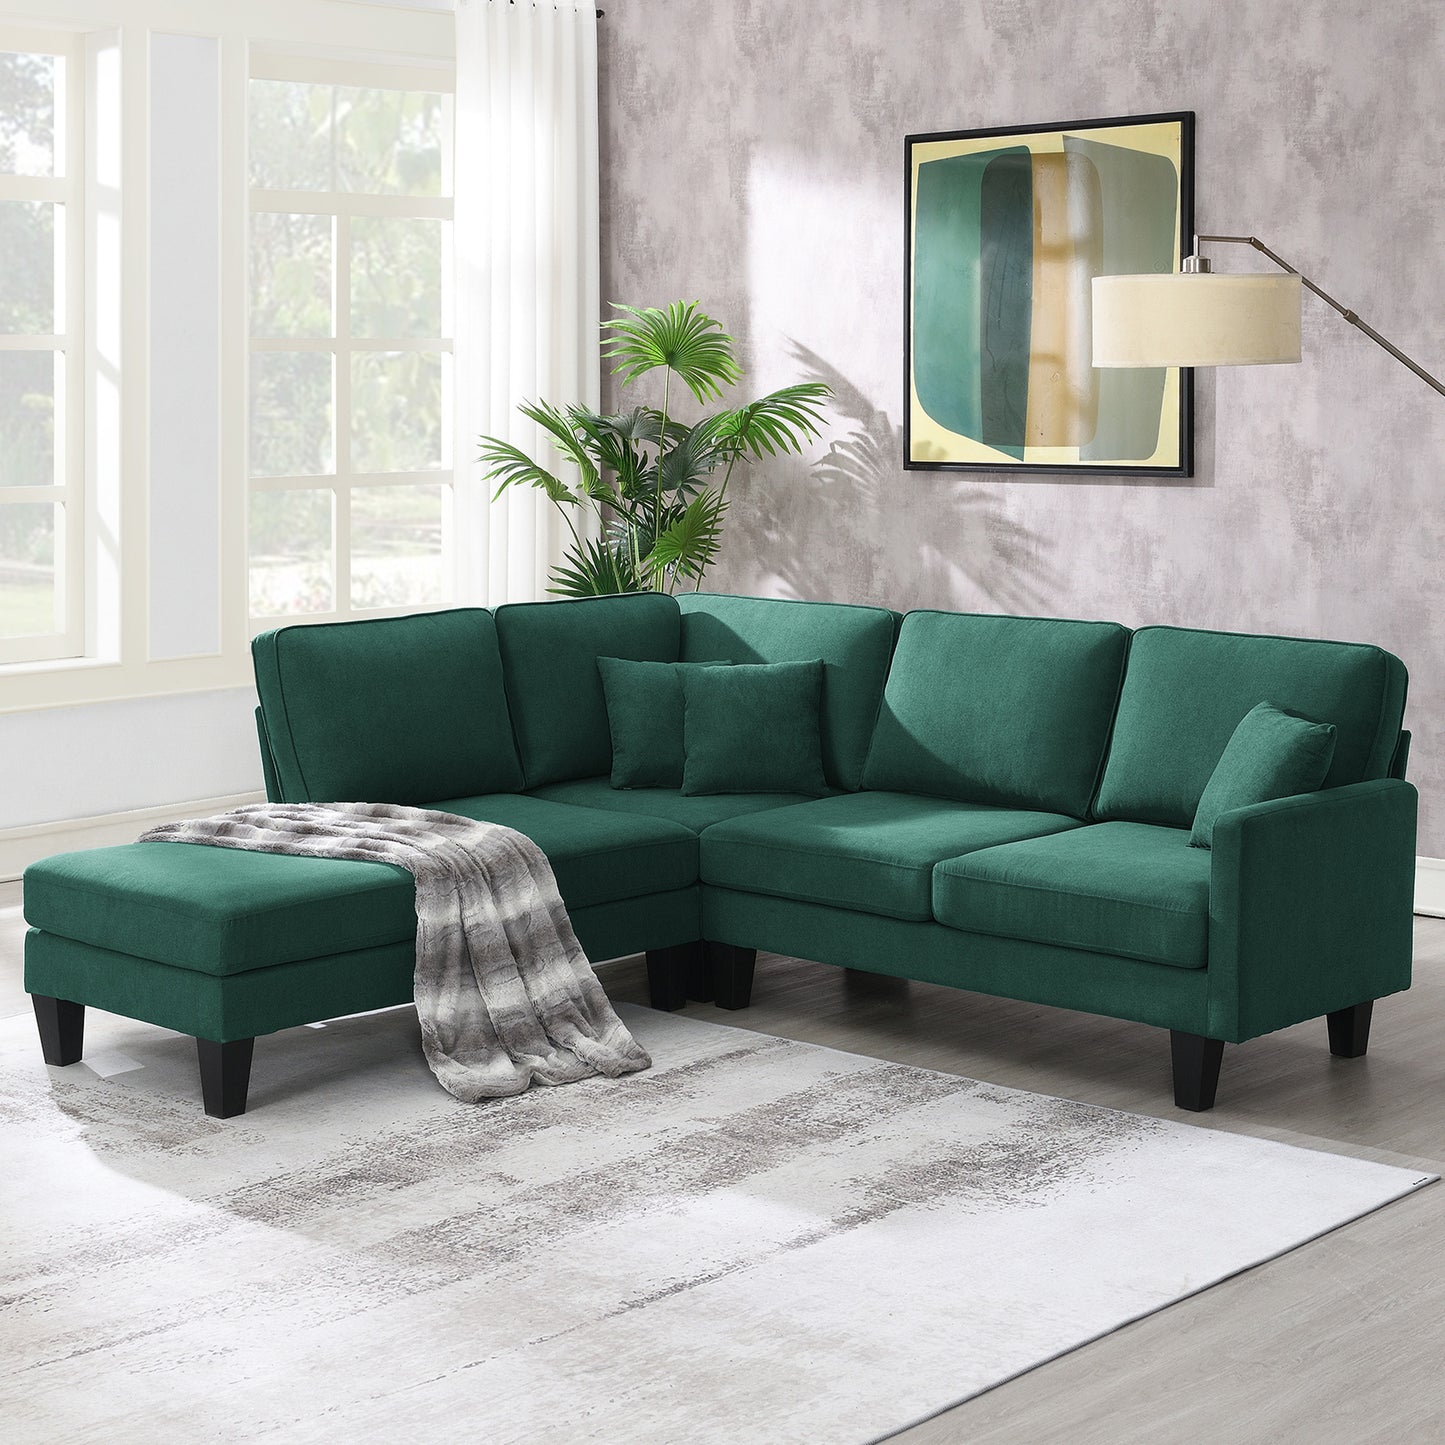 Sectional Sofa, 5-Seat Set, Chaise Lounge, Living Room